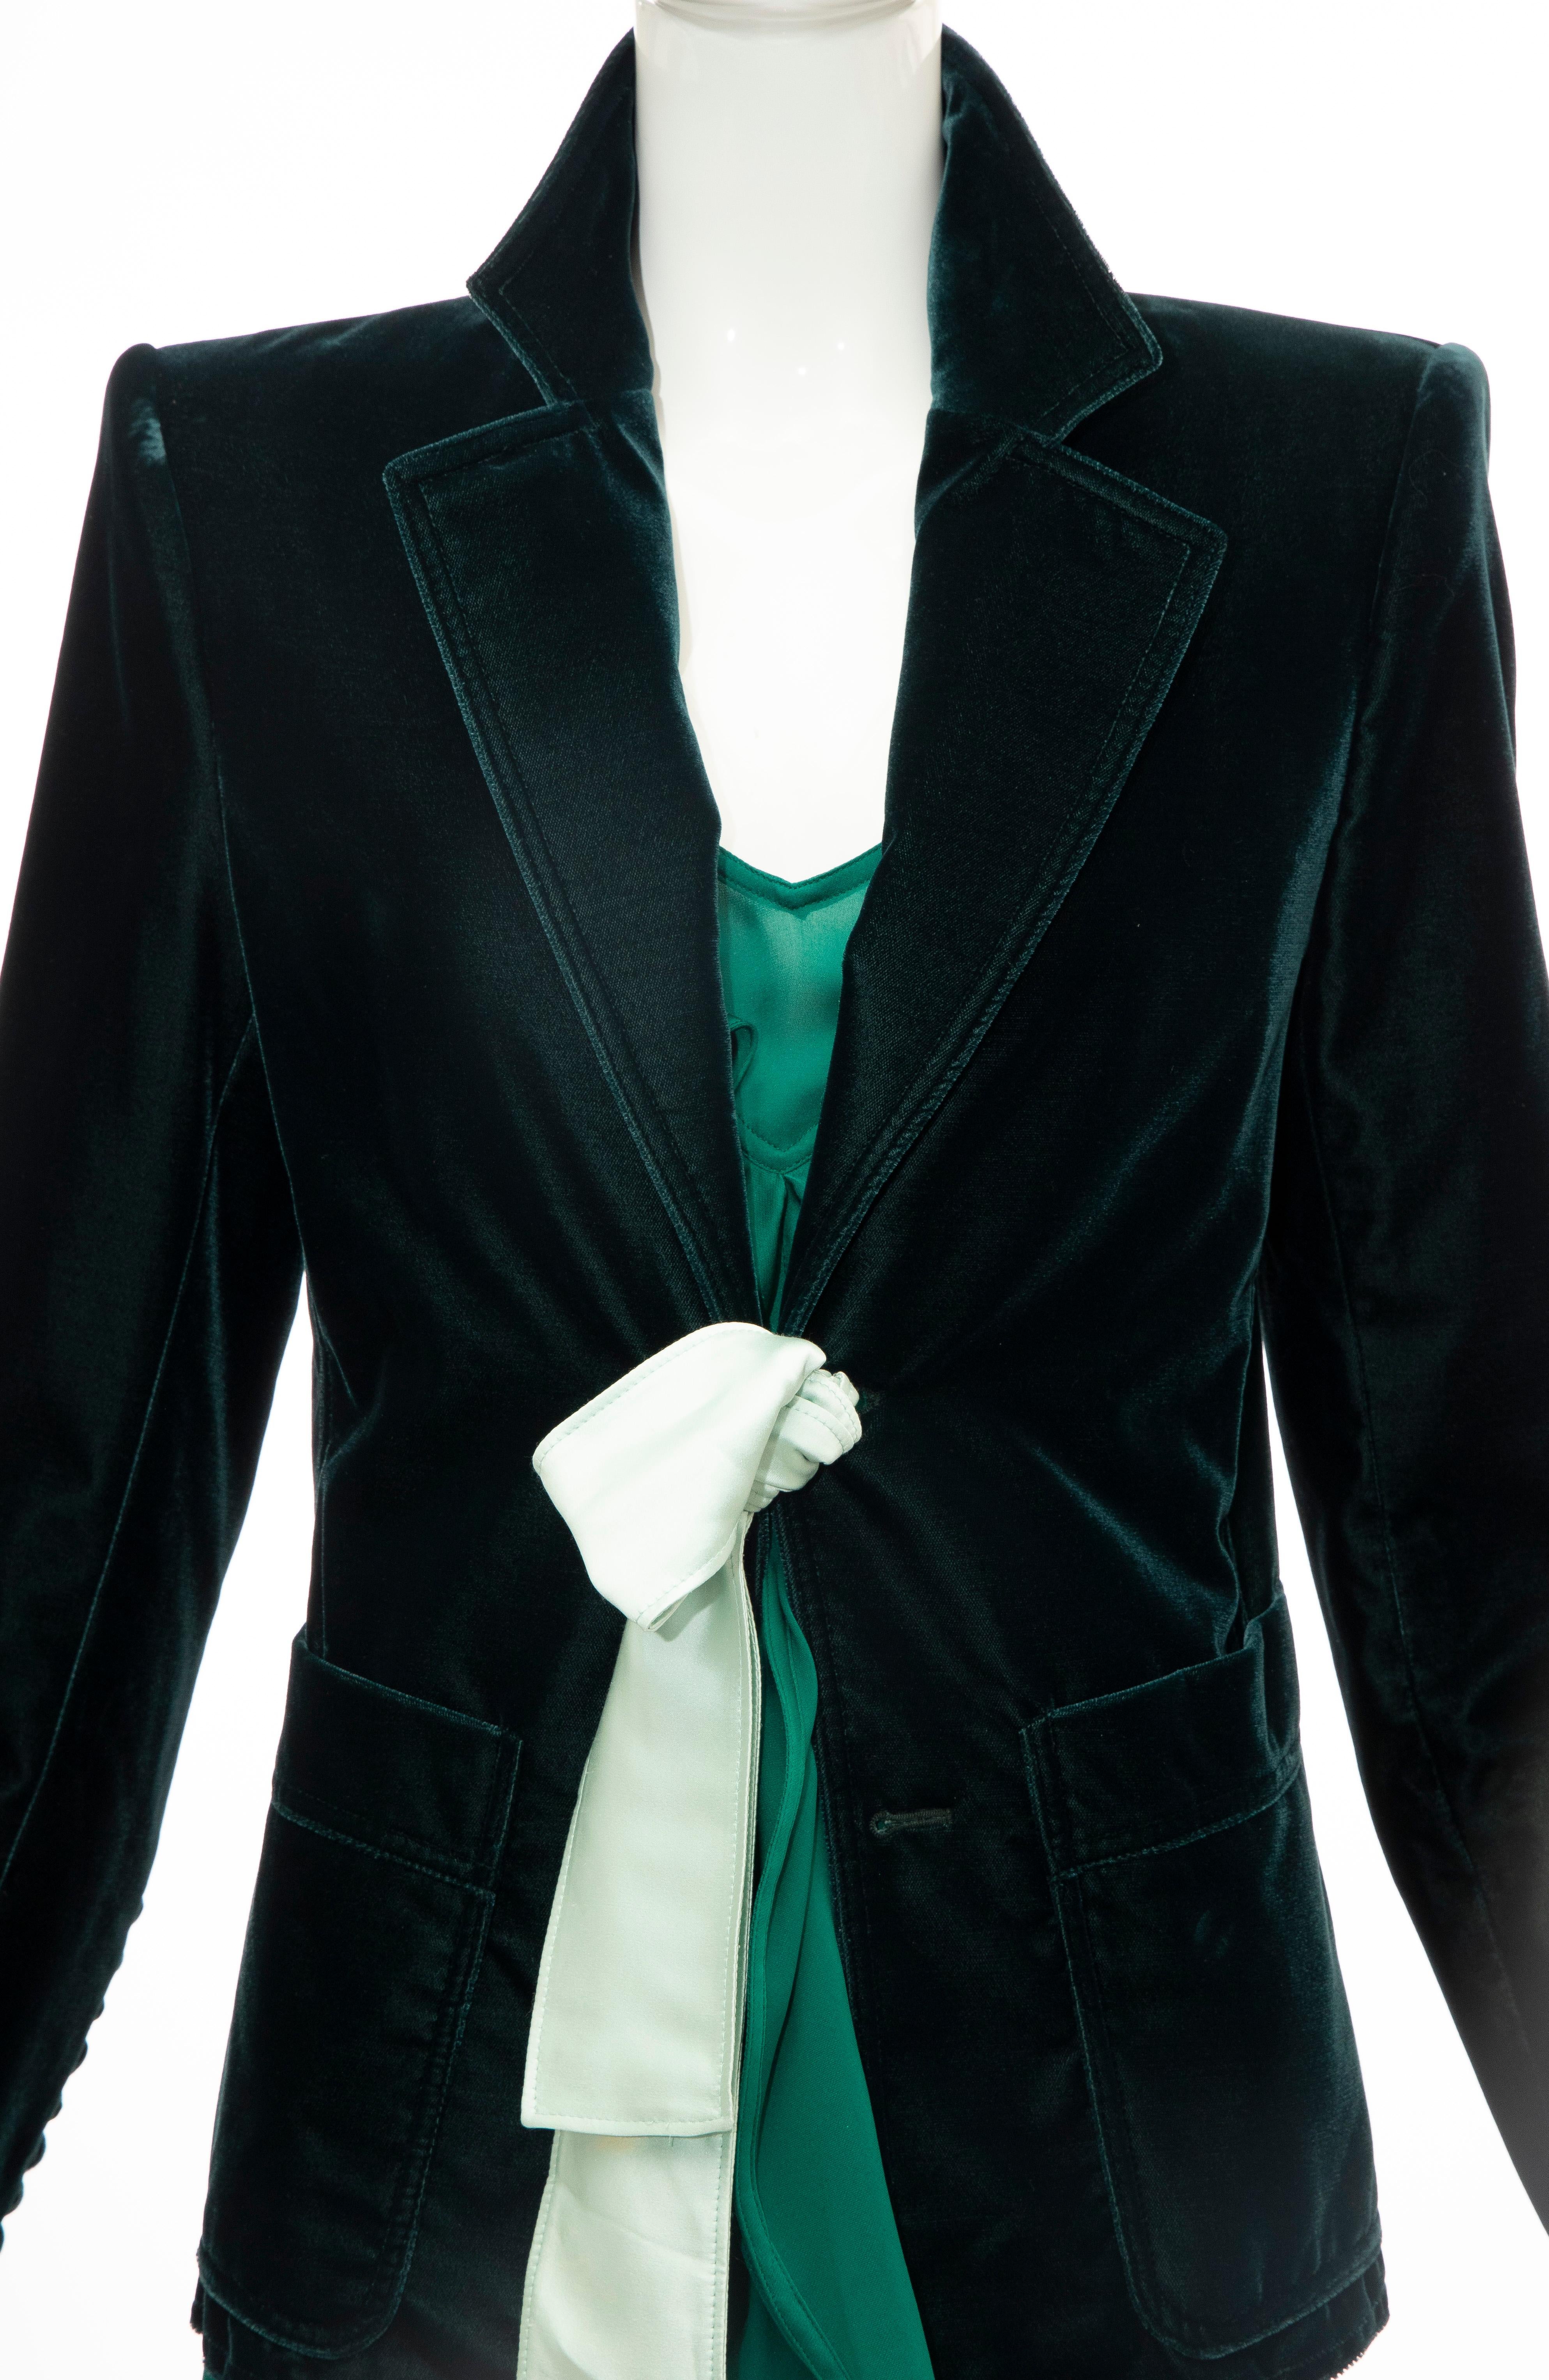 Tom Ford for Yves Saint Laurent, Fall 2003 emerald green velvet & silk dress suit. Emerald green velvet blazer has notch-lapels with structured shoulders, dual patch pockets at waist and satin tie closure at center front. The emerald silk sleeveless